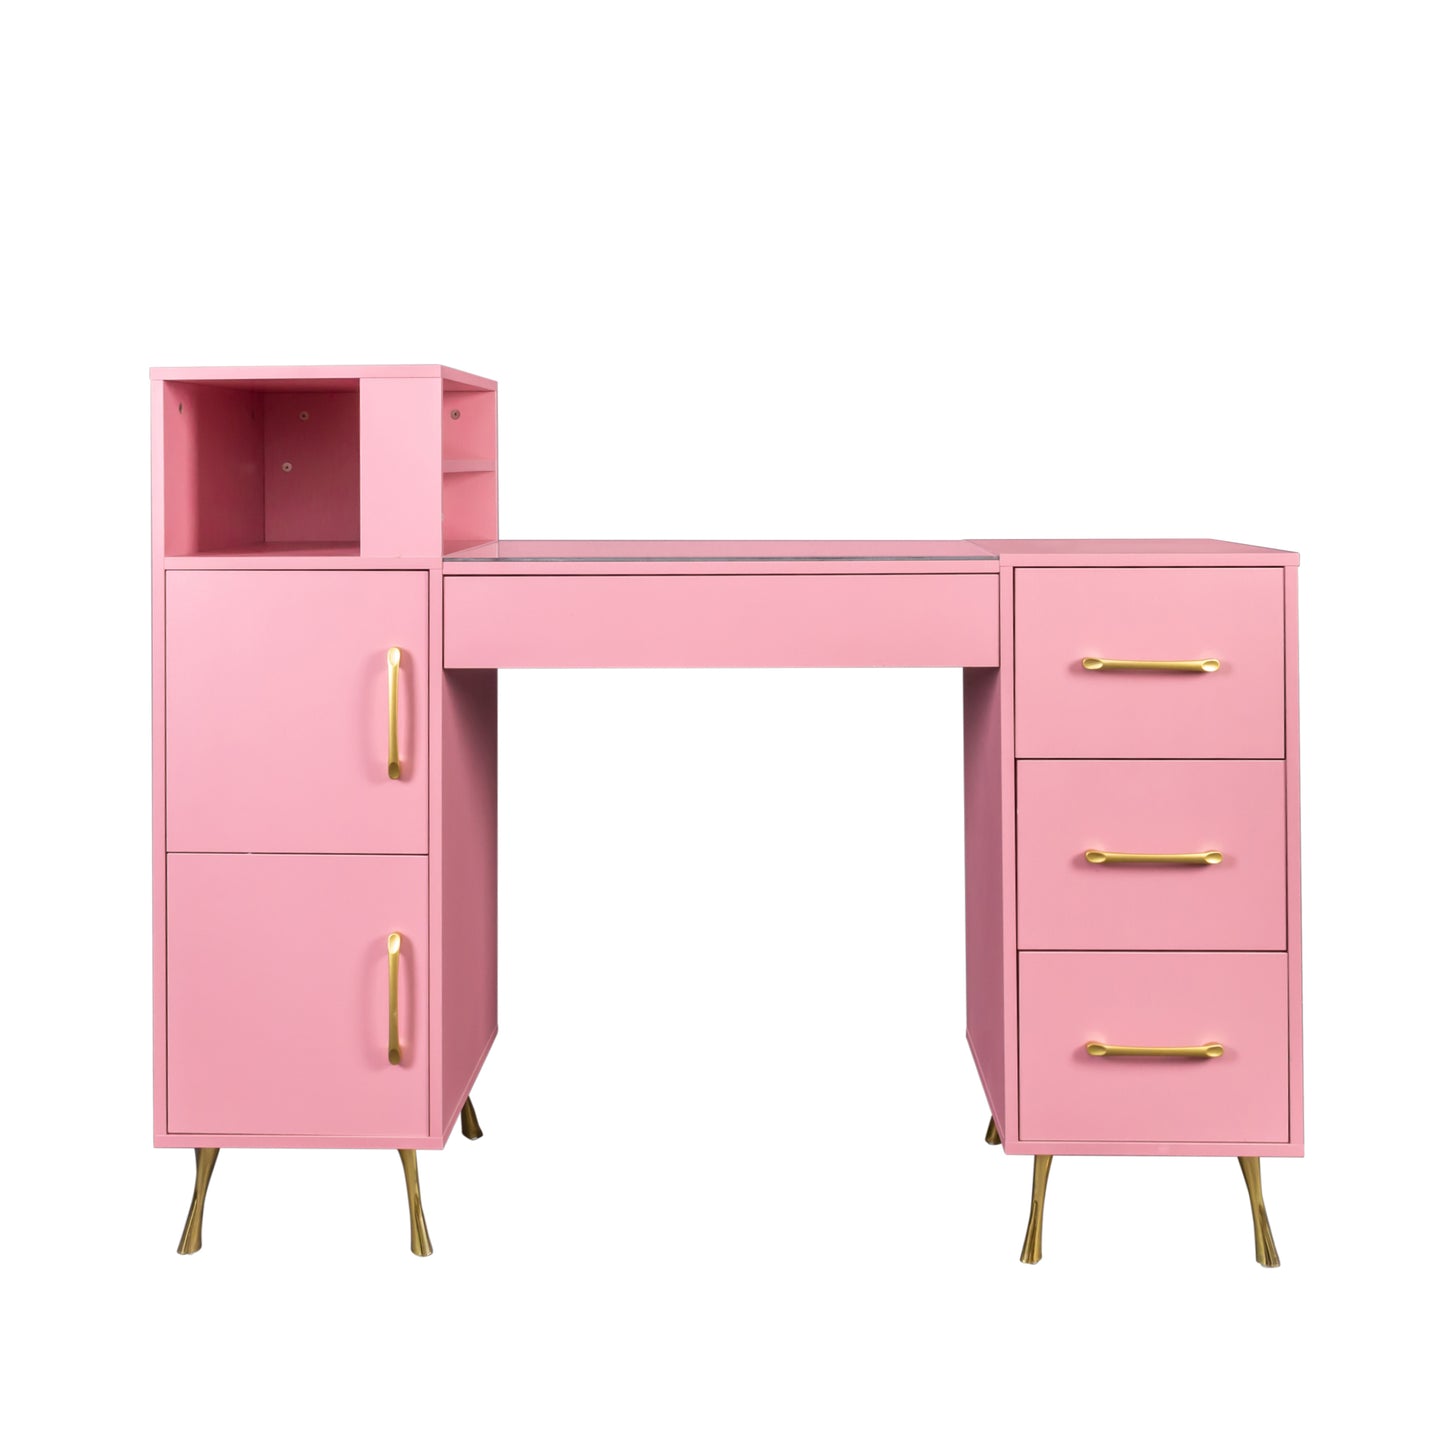 Manicure Table, Nail Makeup Desk with Drawers